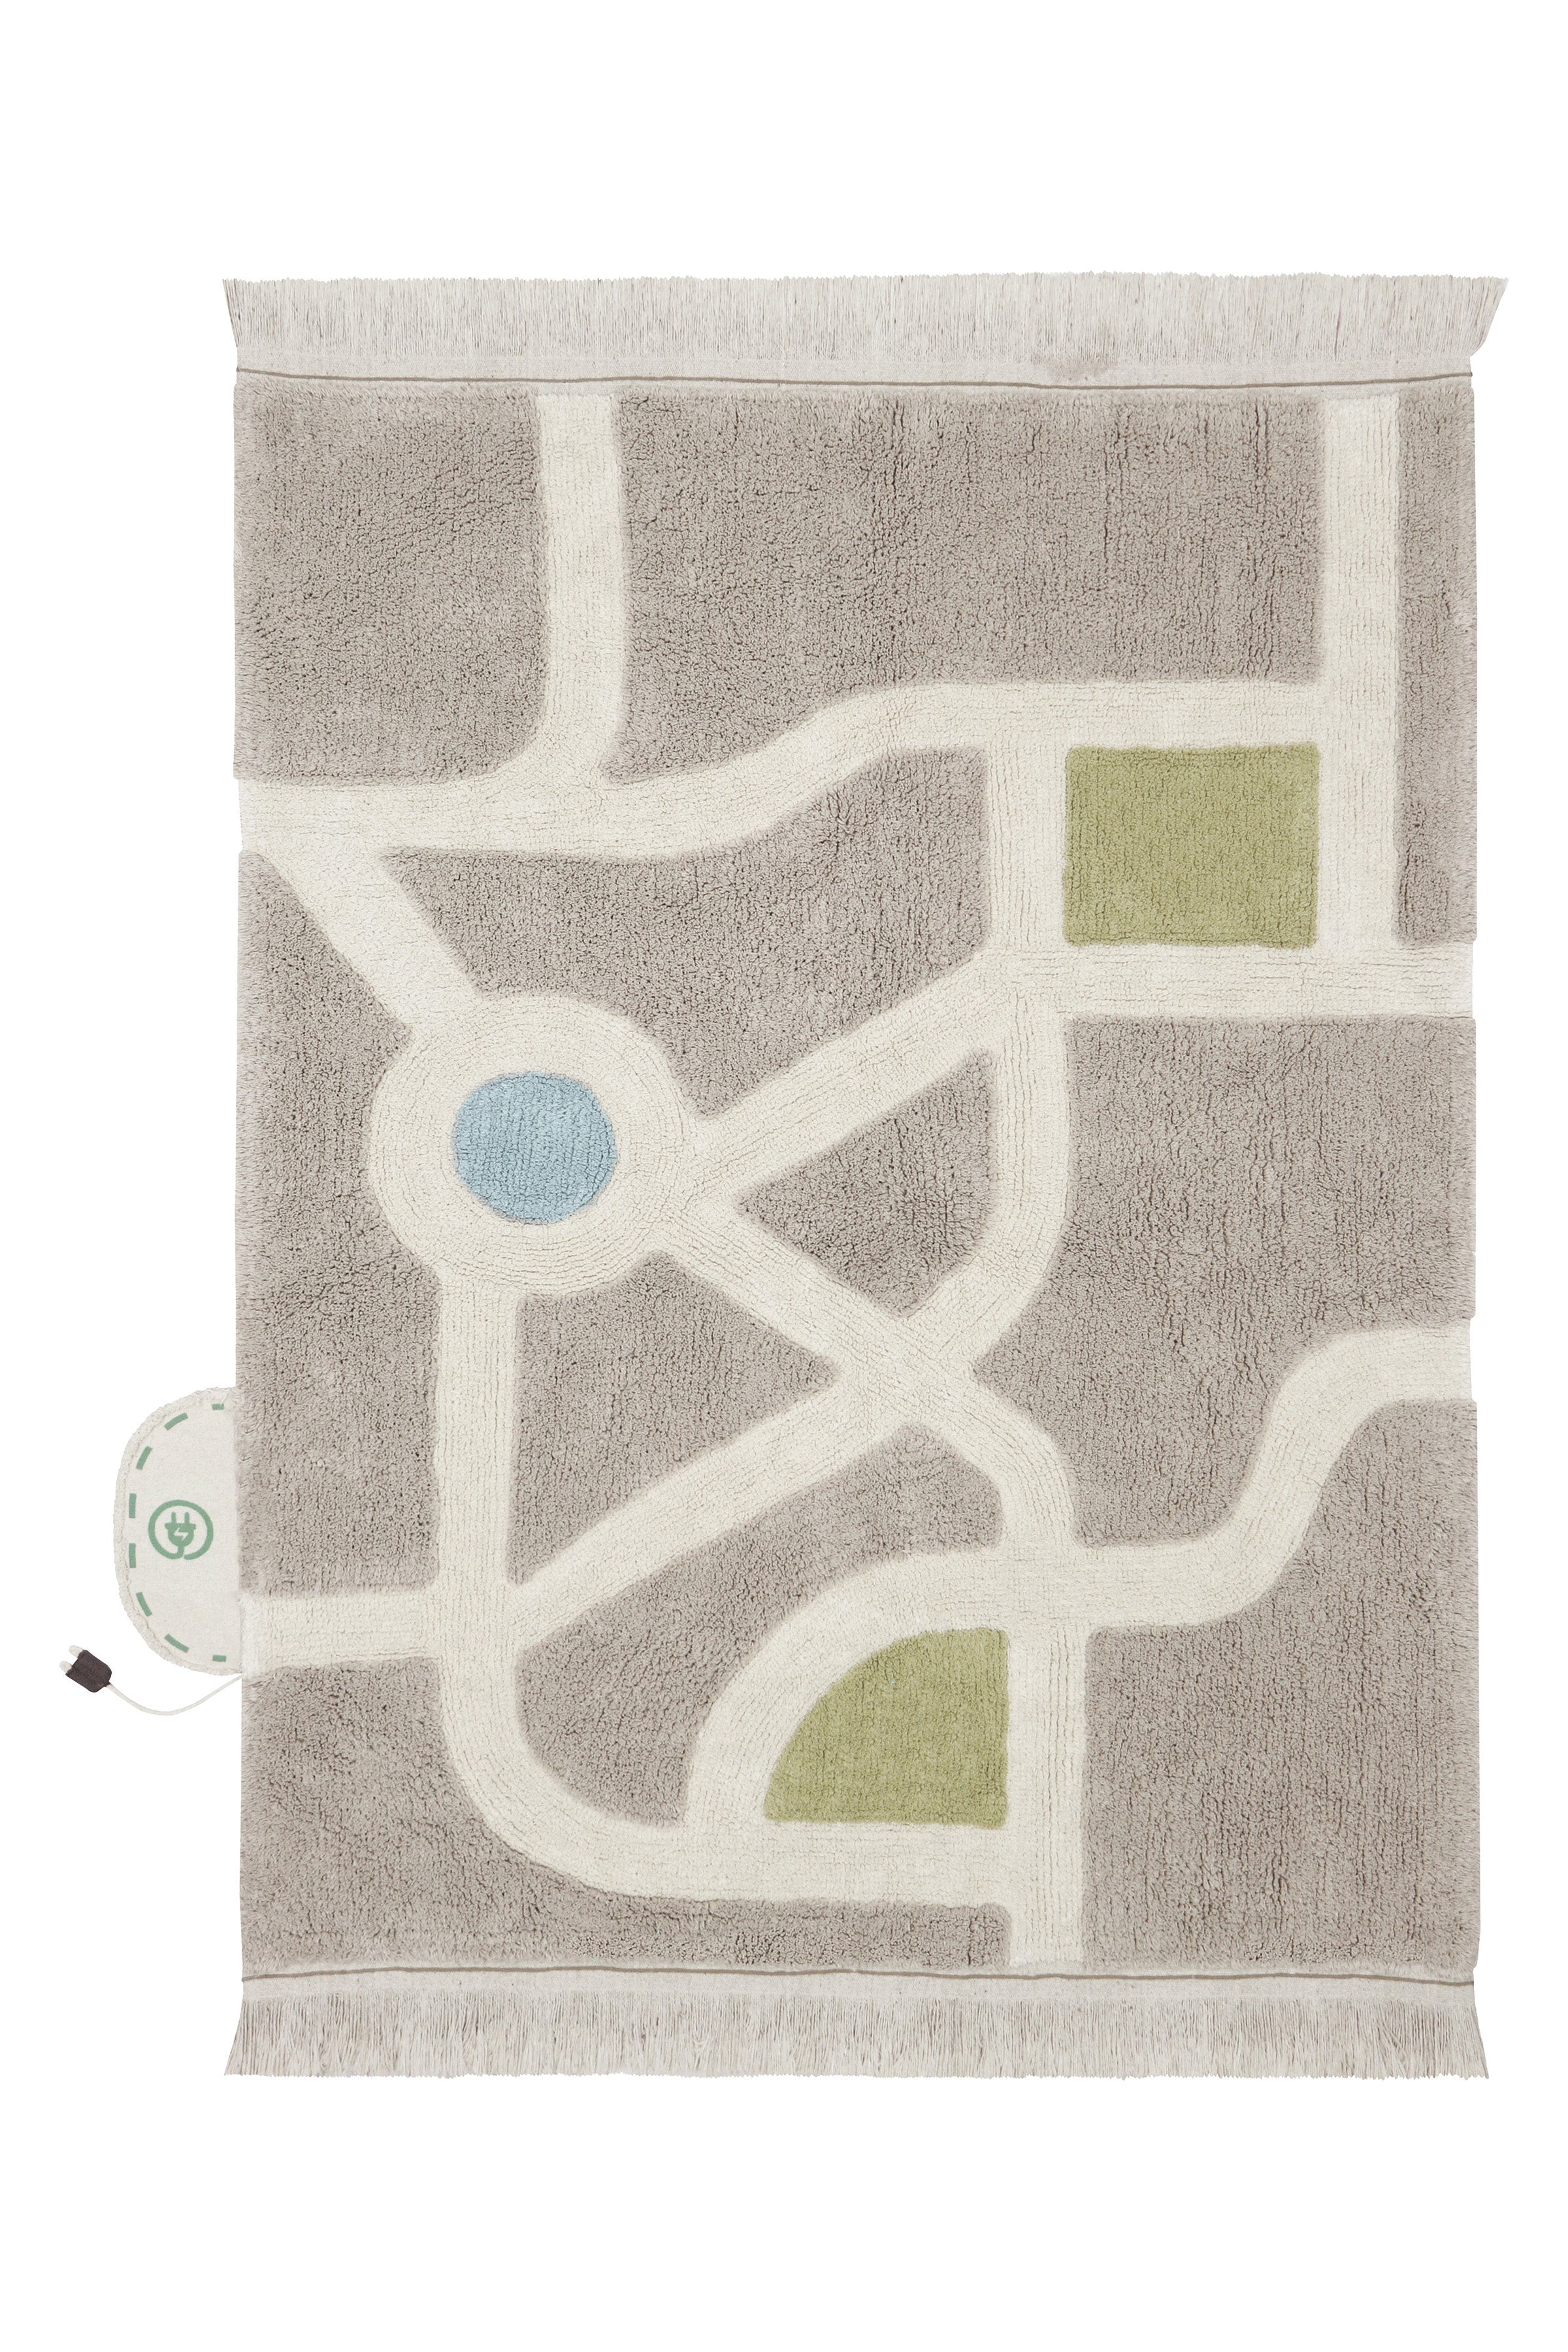 Grey, cream, blue, and green rug with city plan pattern and added city toys